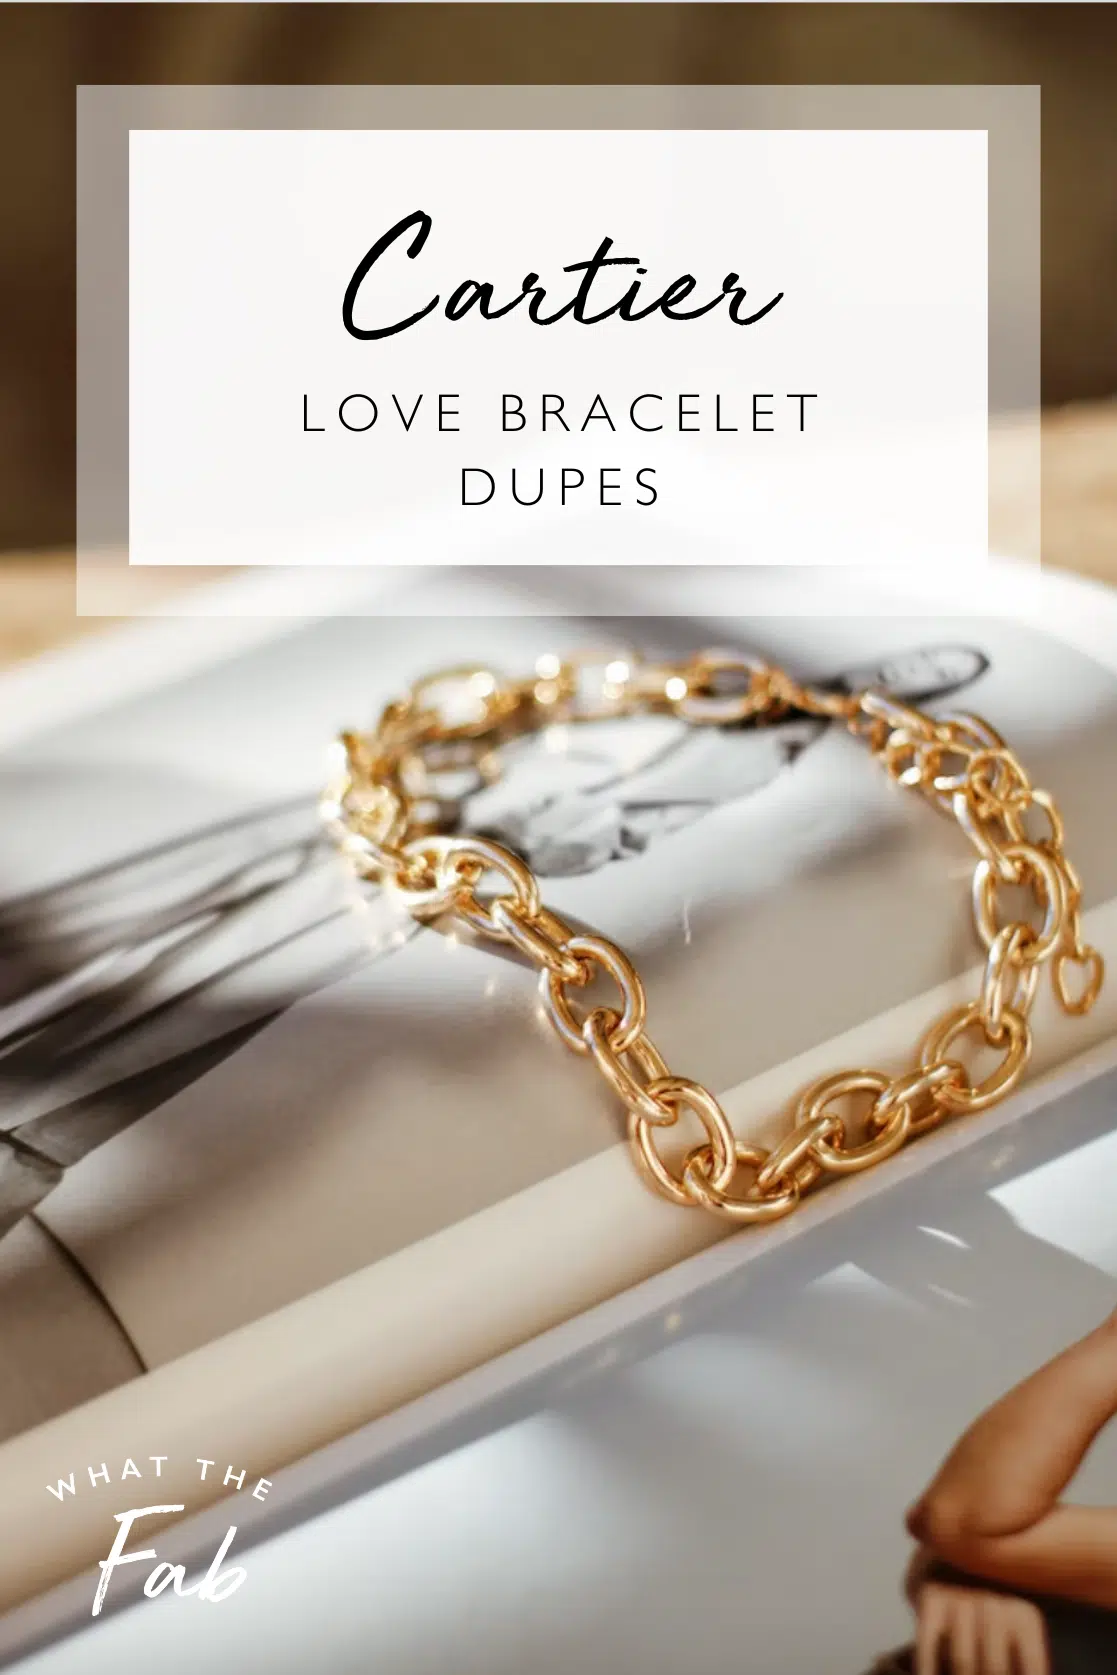 Buy online Cartier Bracelet And Ring Rose Gold In Pakistan Rs 2600  Best  Price  find the best quality of Womenjewelry Menjewelry Jewelryjewellery   Bracelets Rings Neck Less Earrings Hairpin Hand